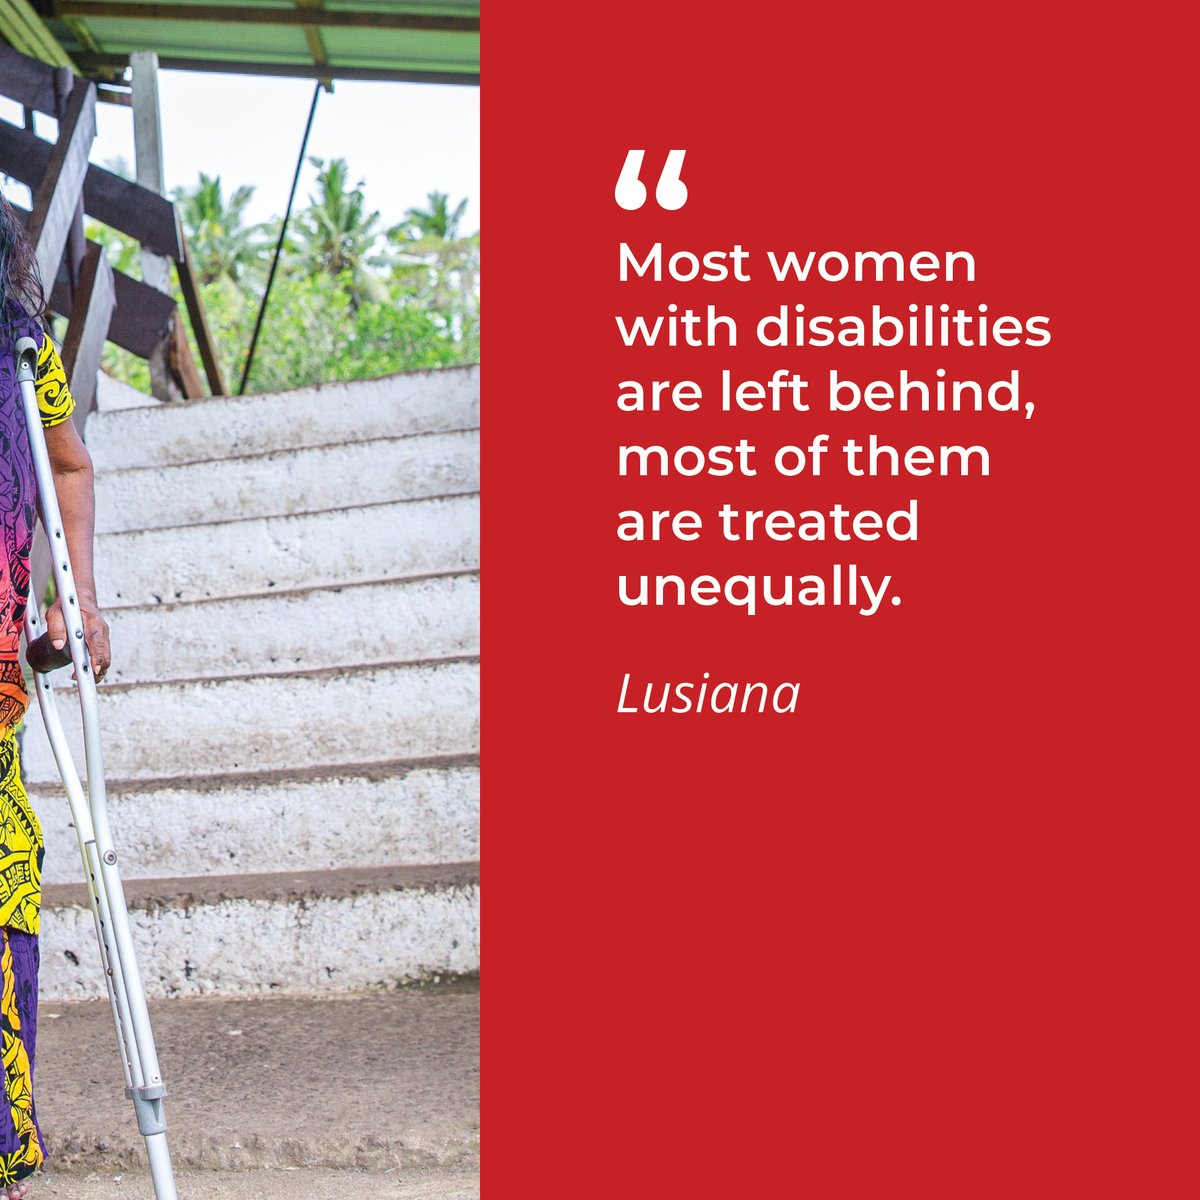 Gender inequality impacts women everywhere. Women with disabilities lack access to education and employment opportunities, and are at even greater risk of domestic violence. This is their reality bit.ly/3QO2lh8